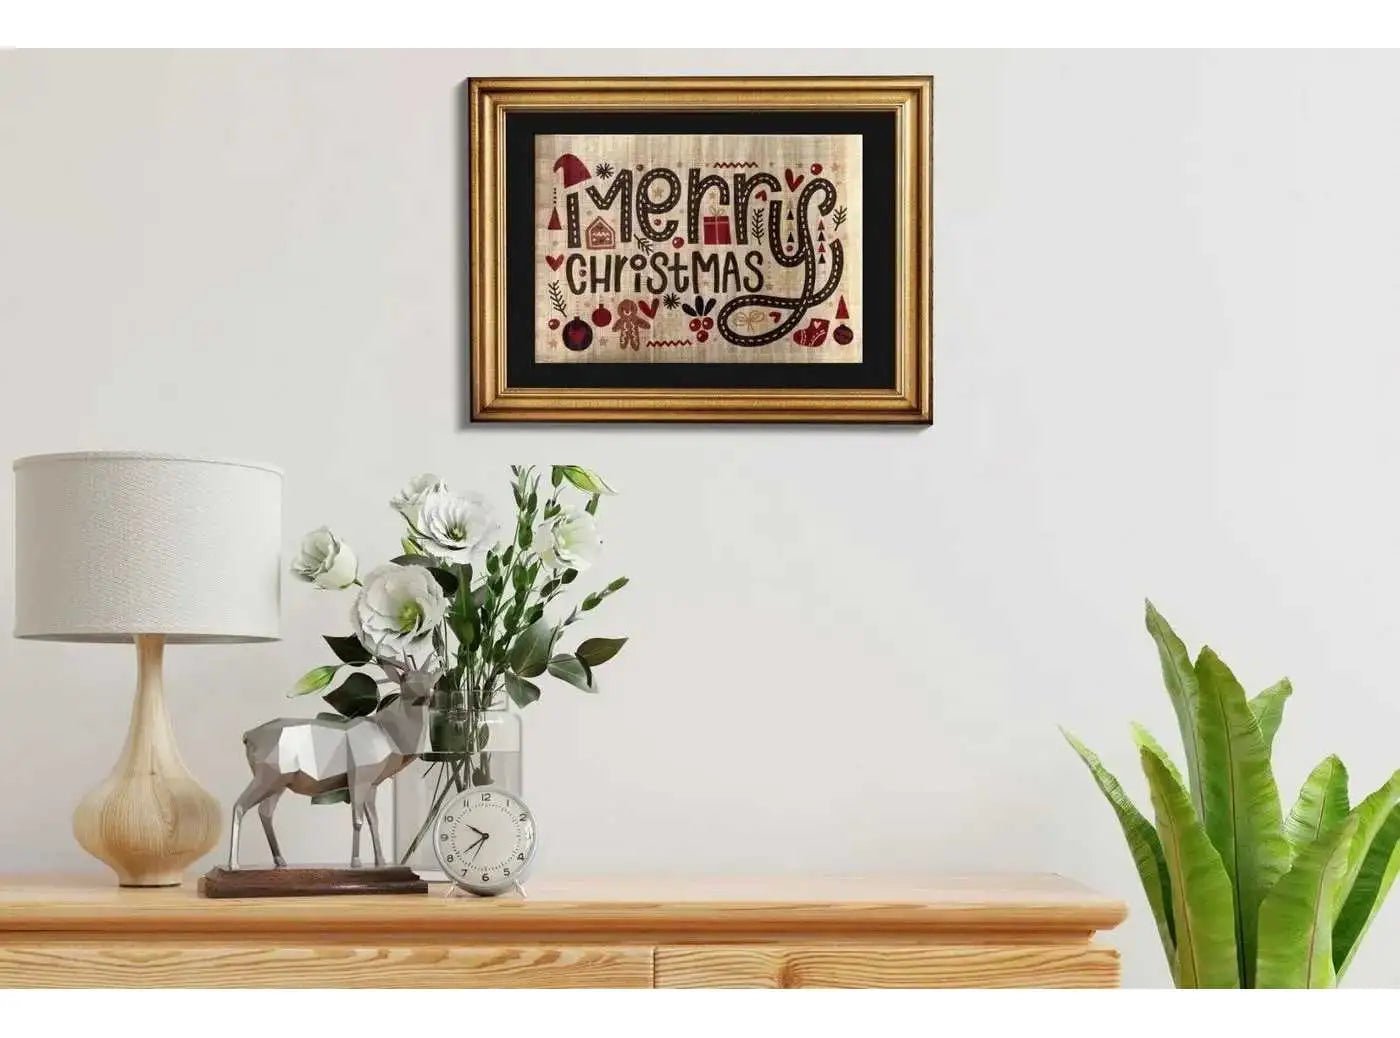 Merry Christmas on Egyptian Papyrus Paper - Merry Christmas Gift Card Printing Authentic Papyrus